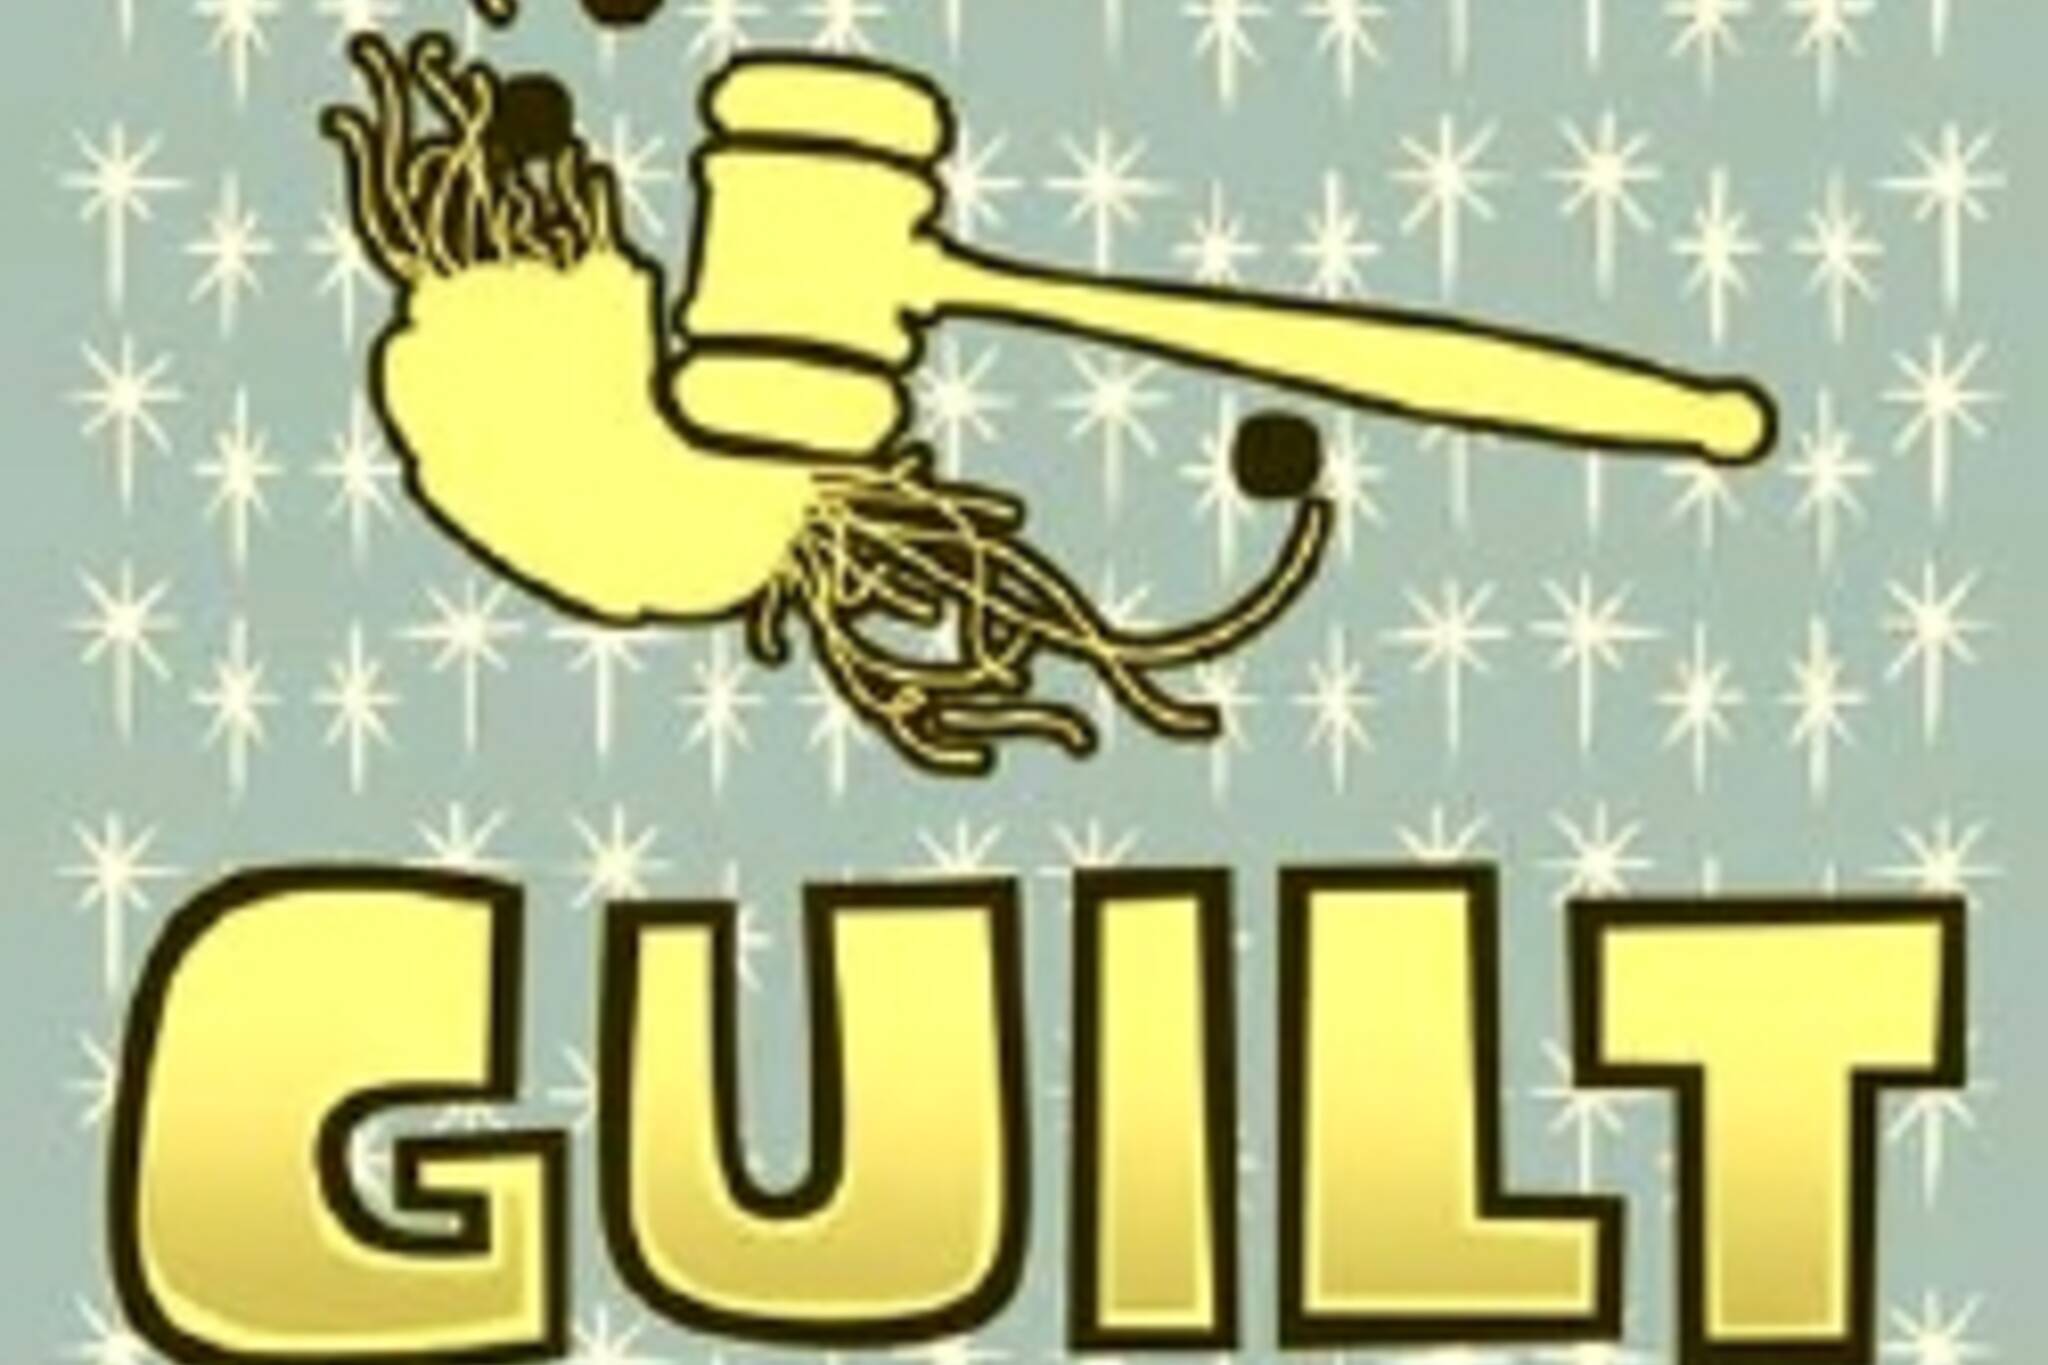 Guilt Pasta by Jeff Cottrill